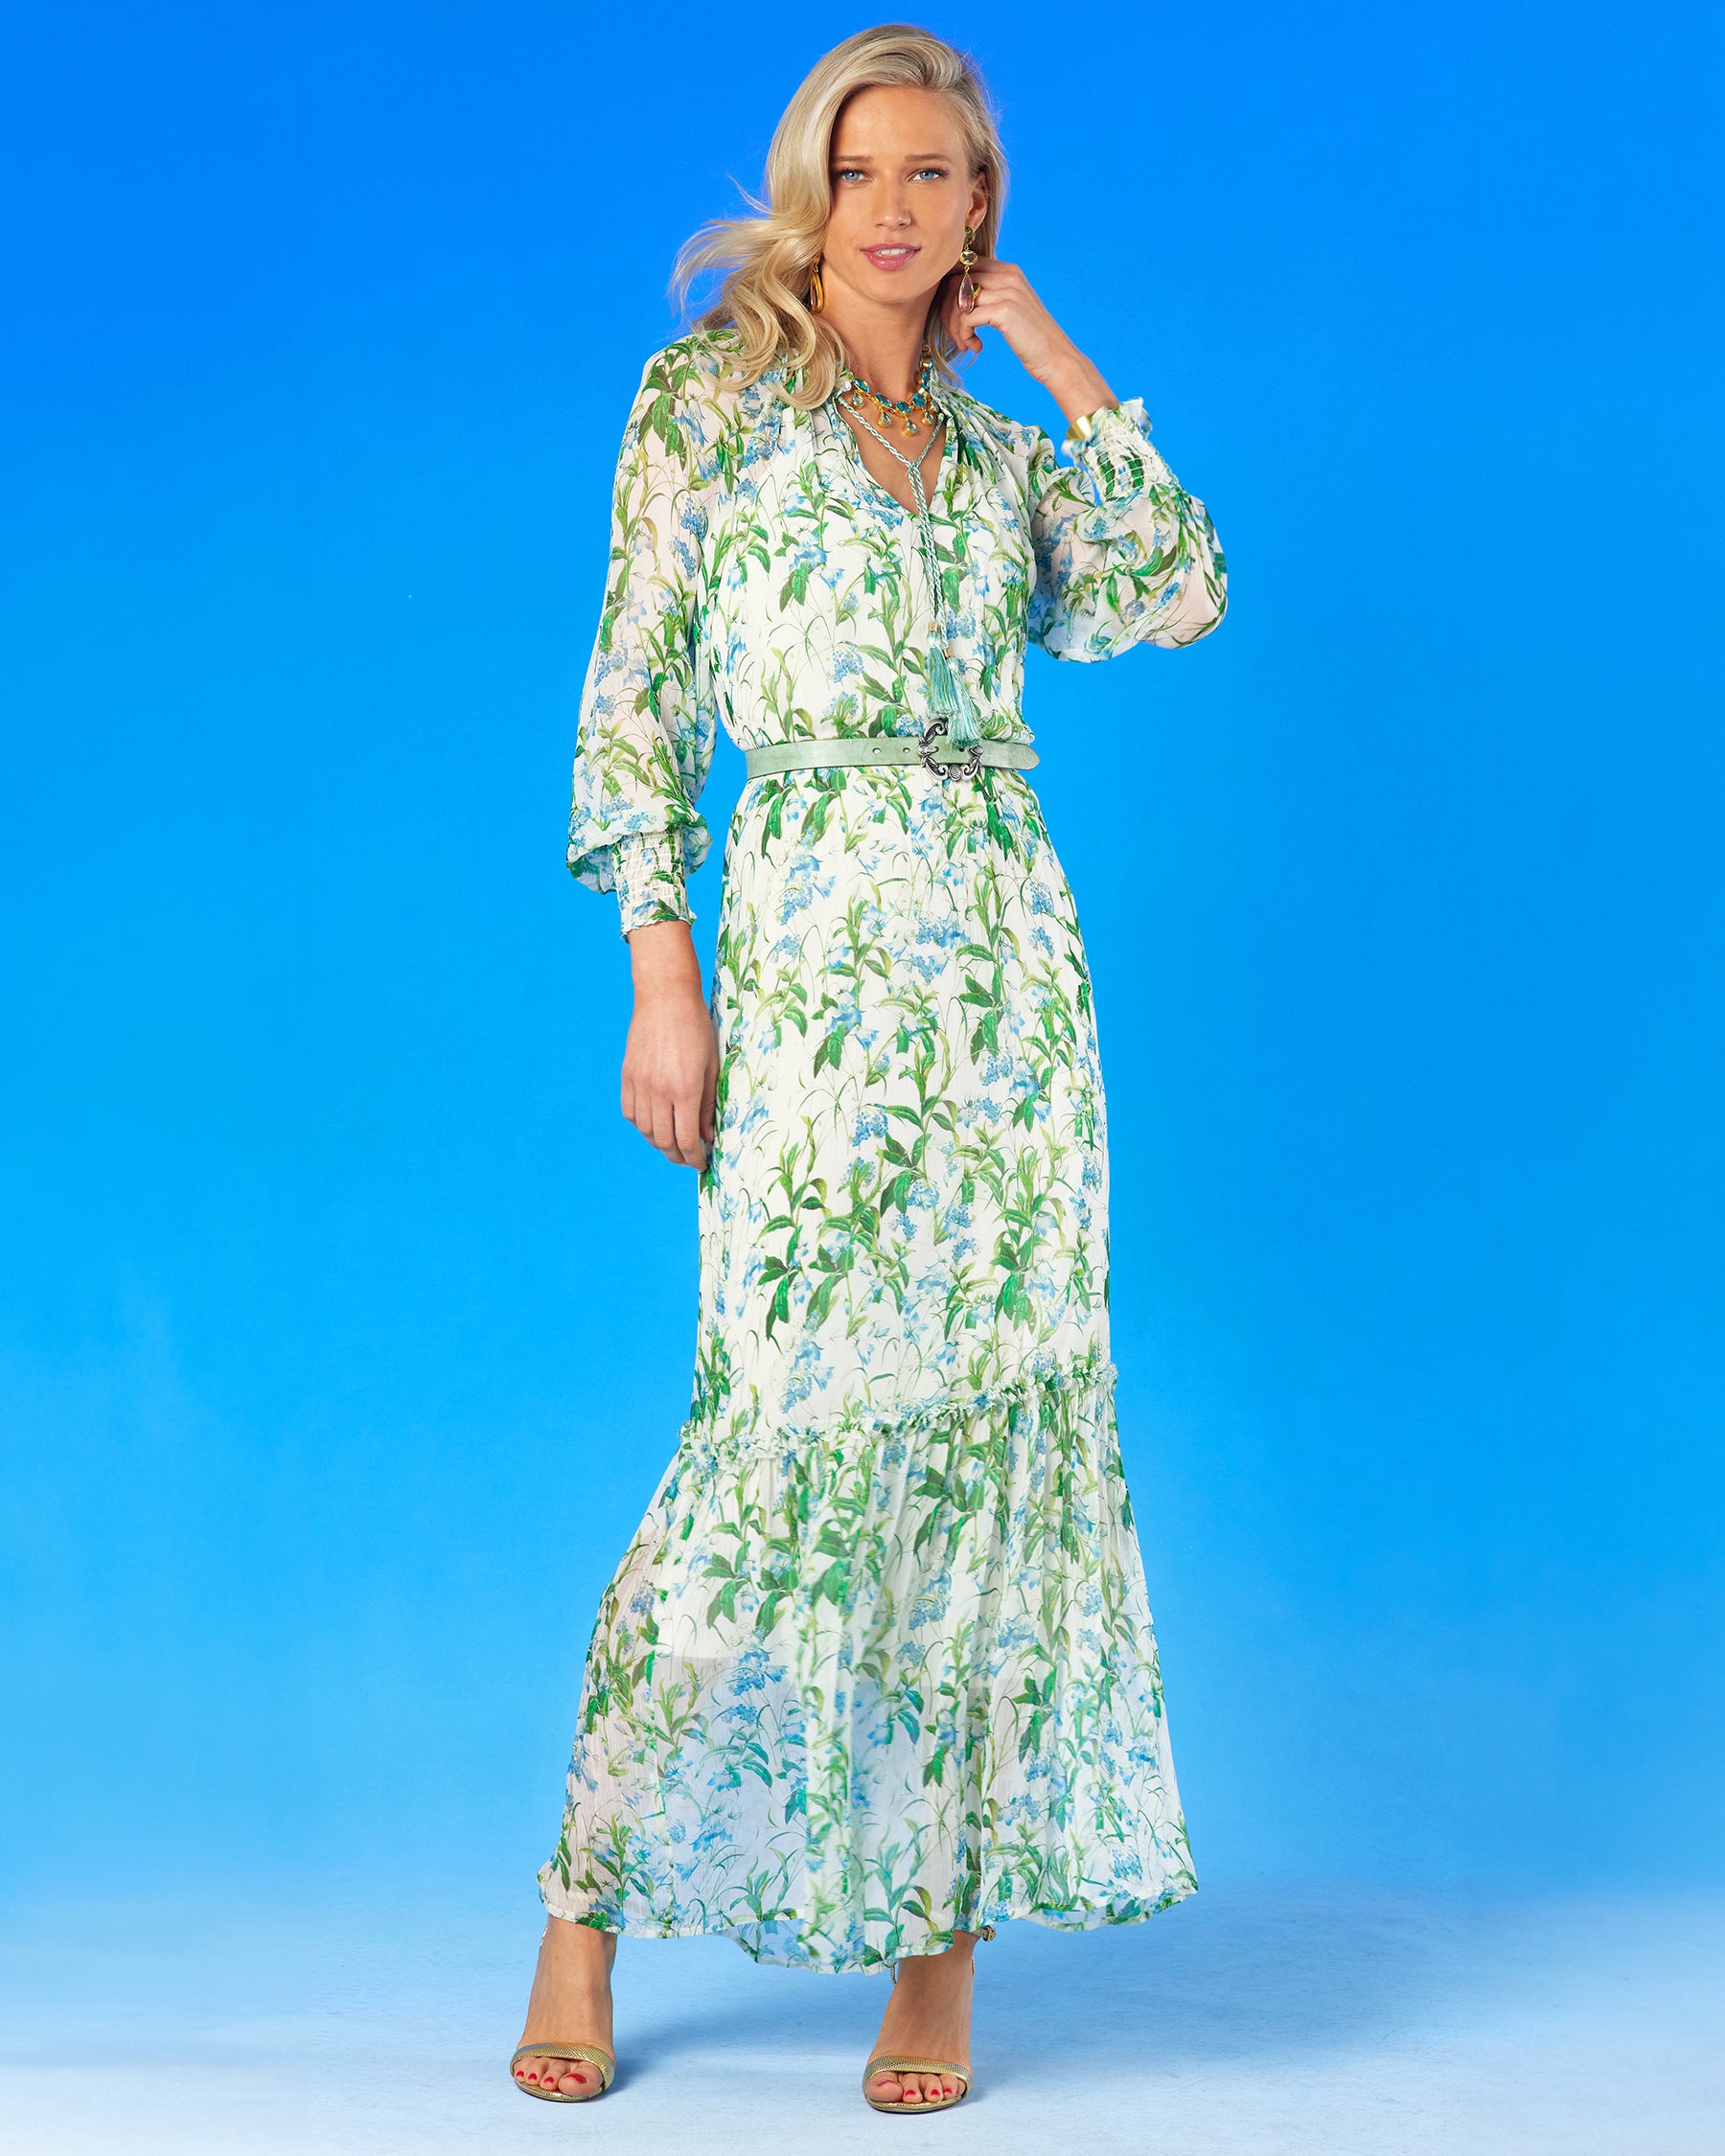 Celine Maxi Crinkle Chiffon Dress in Meadow Reverie-Full view with arm up near the face